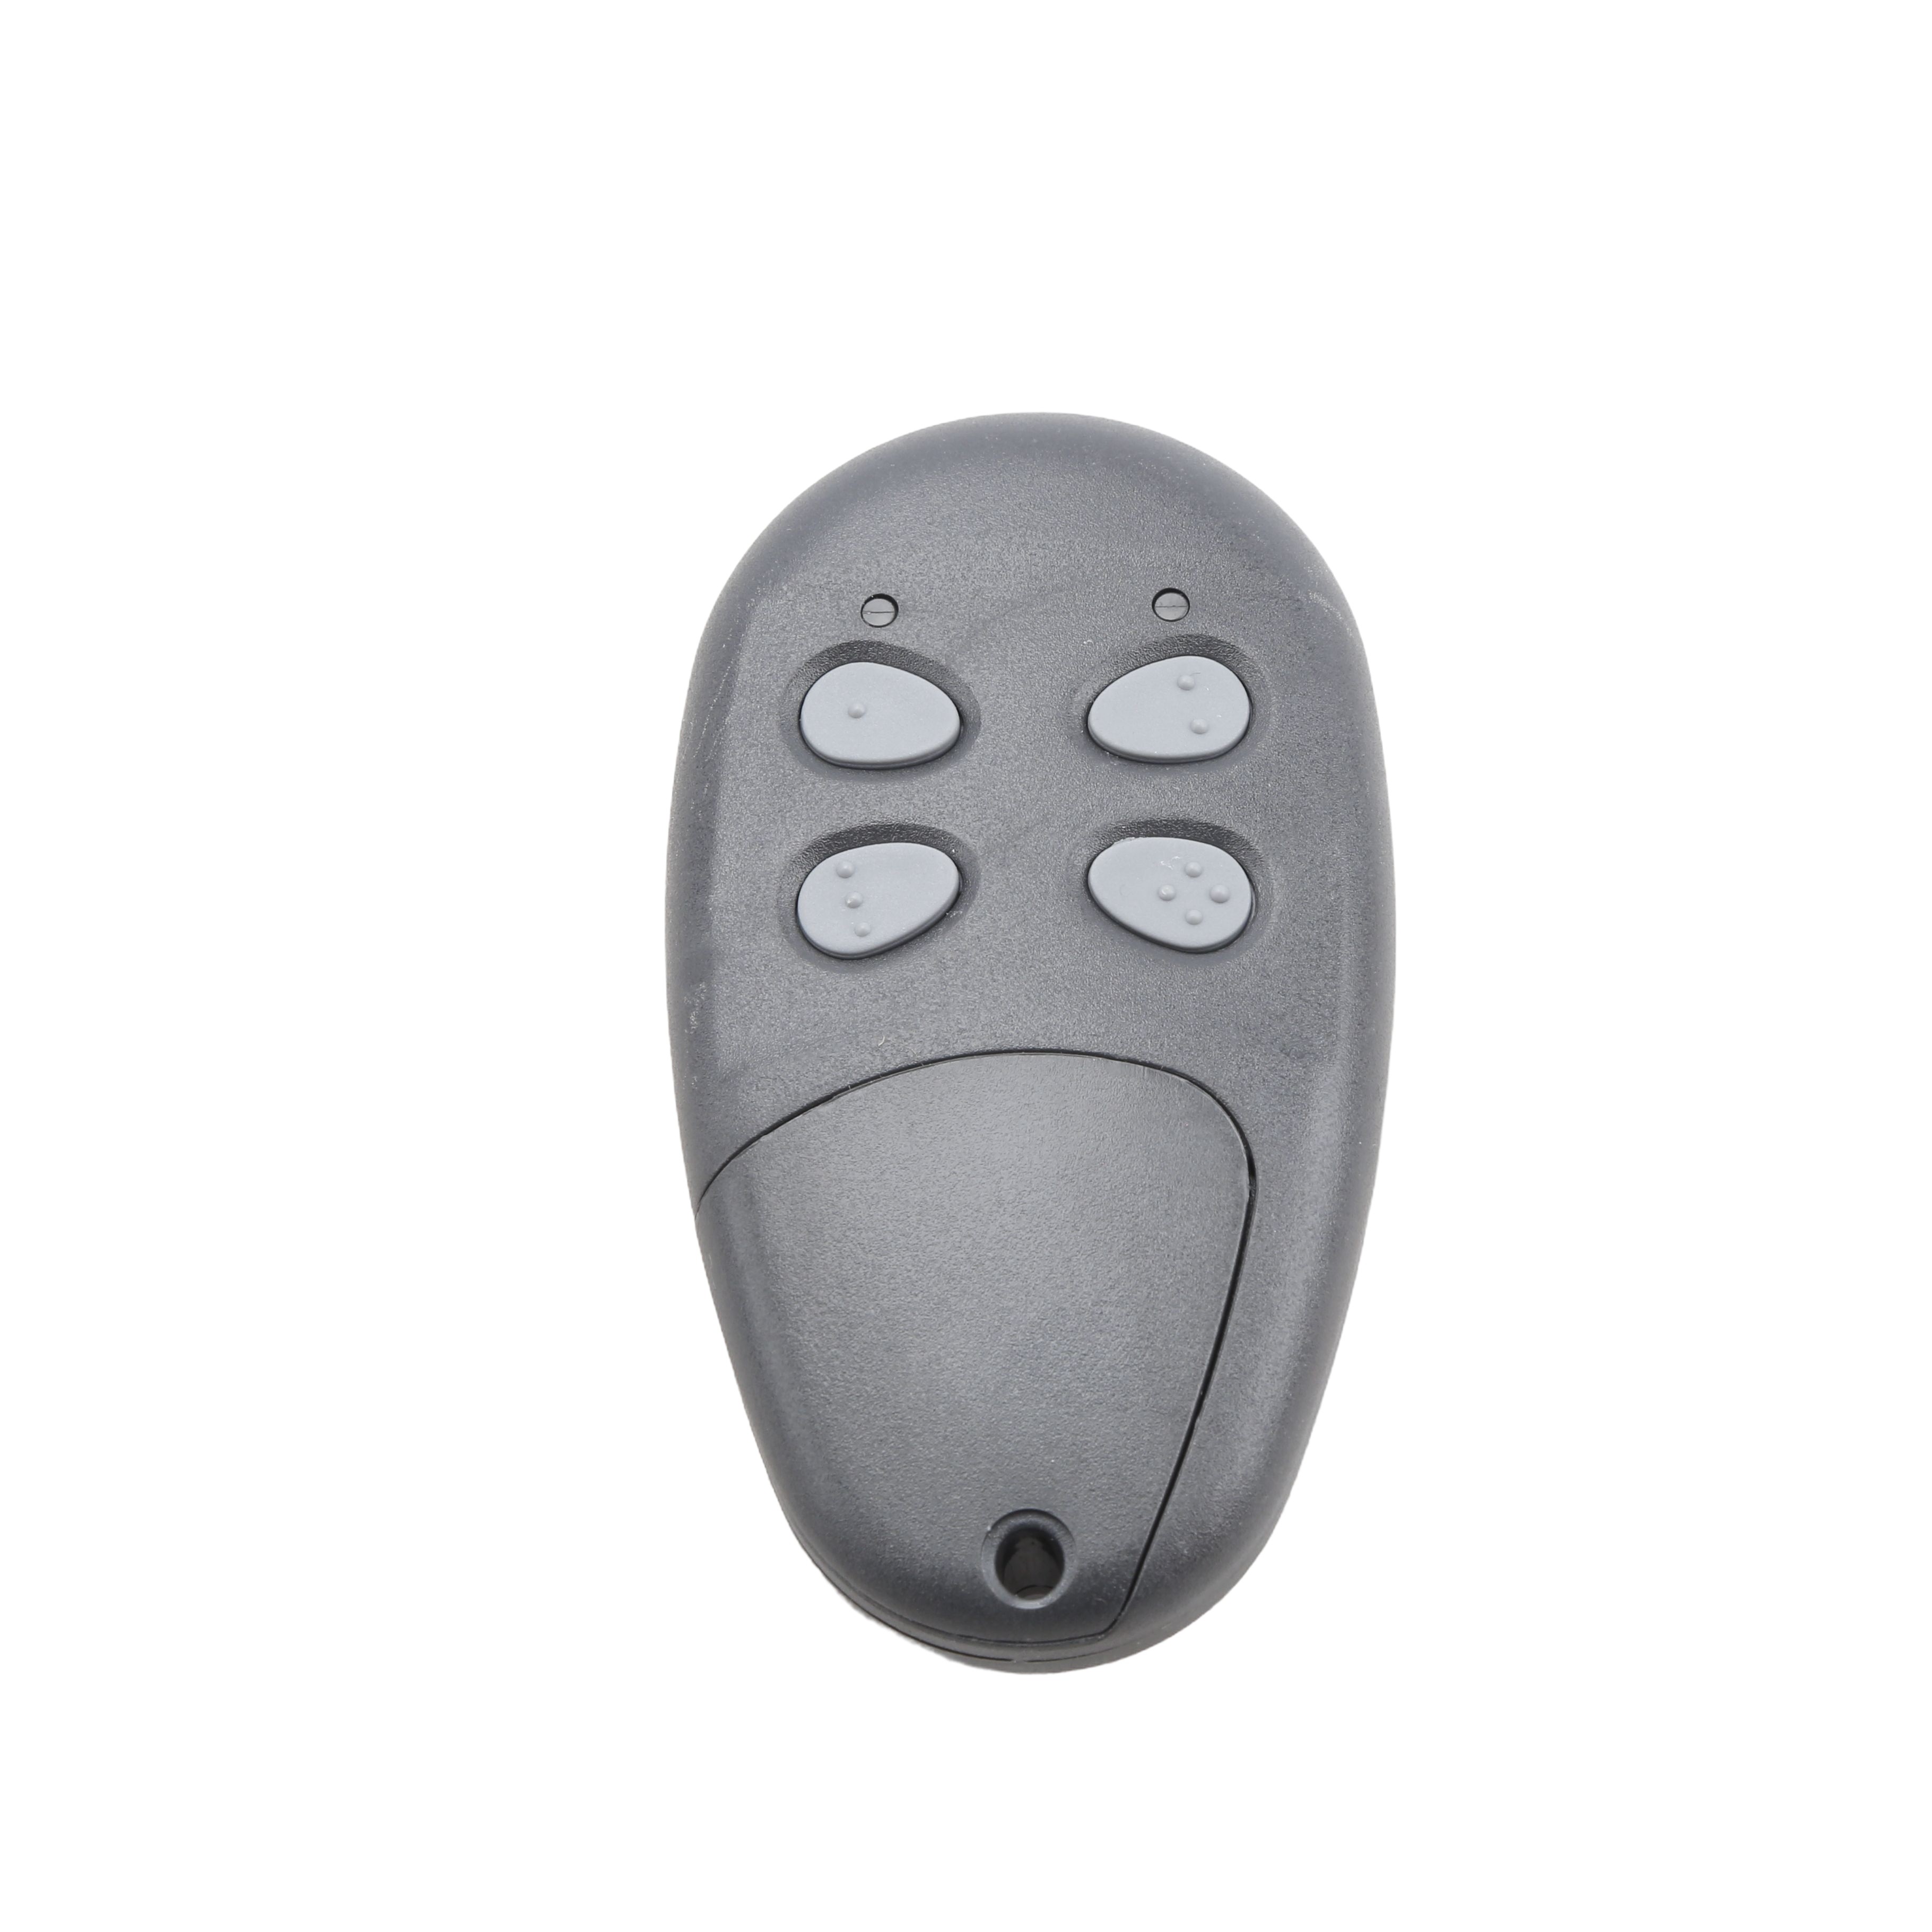 https://usautomaticgateopeners.com/store/media/catalog/product/cache/1/image/9df78eab33525d08d6e5fb8d27136e95/0/3/030212_lcr-4-button-transmitter---usautomatic-030212_6_1.jpg